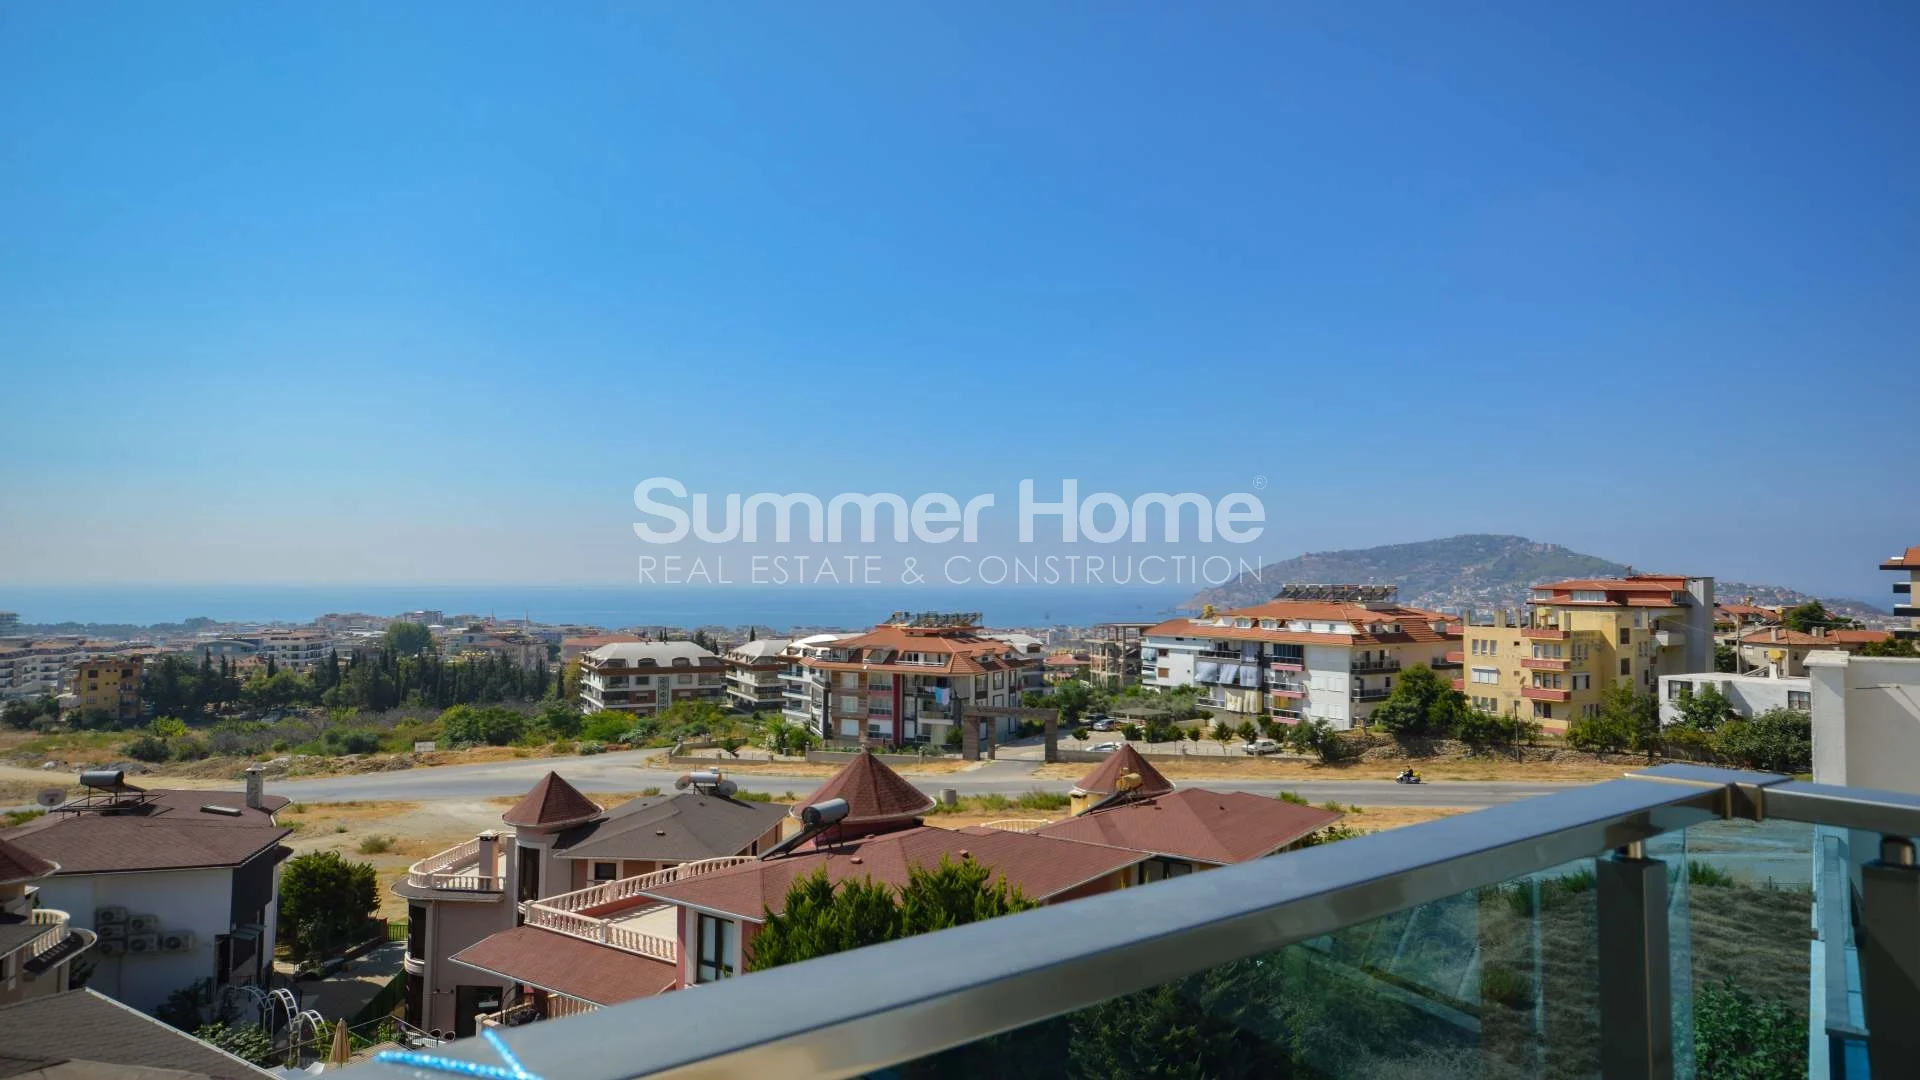 For sale Apartment Alanya Hasbahce Interior - 1